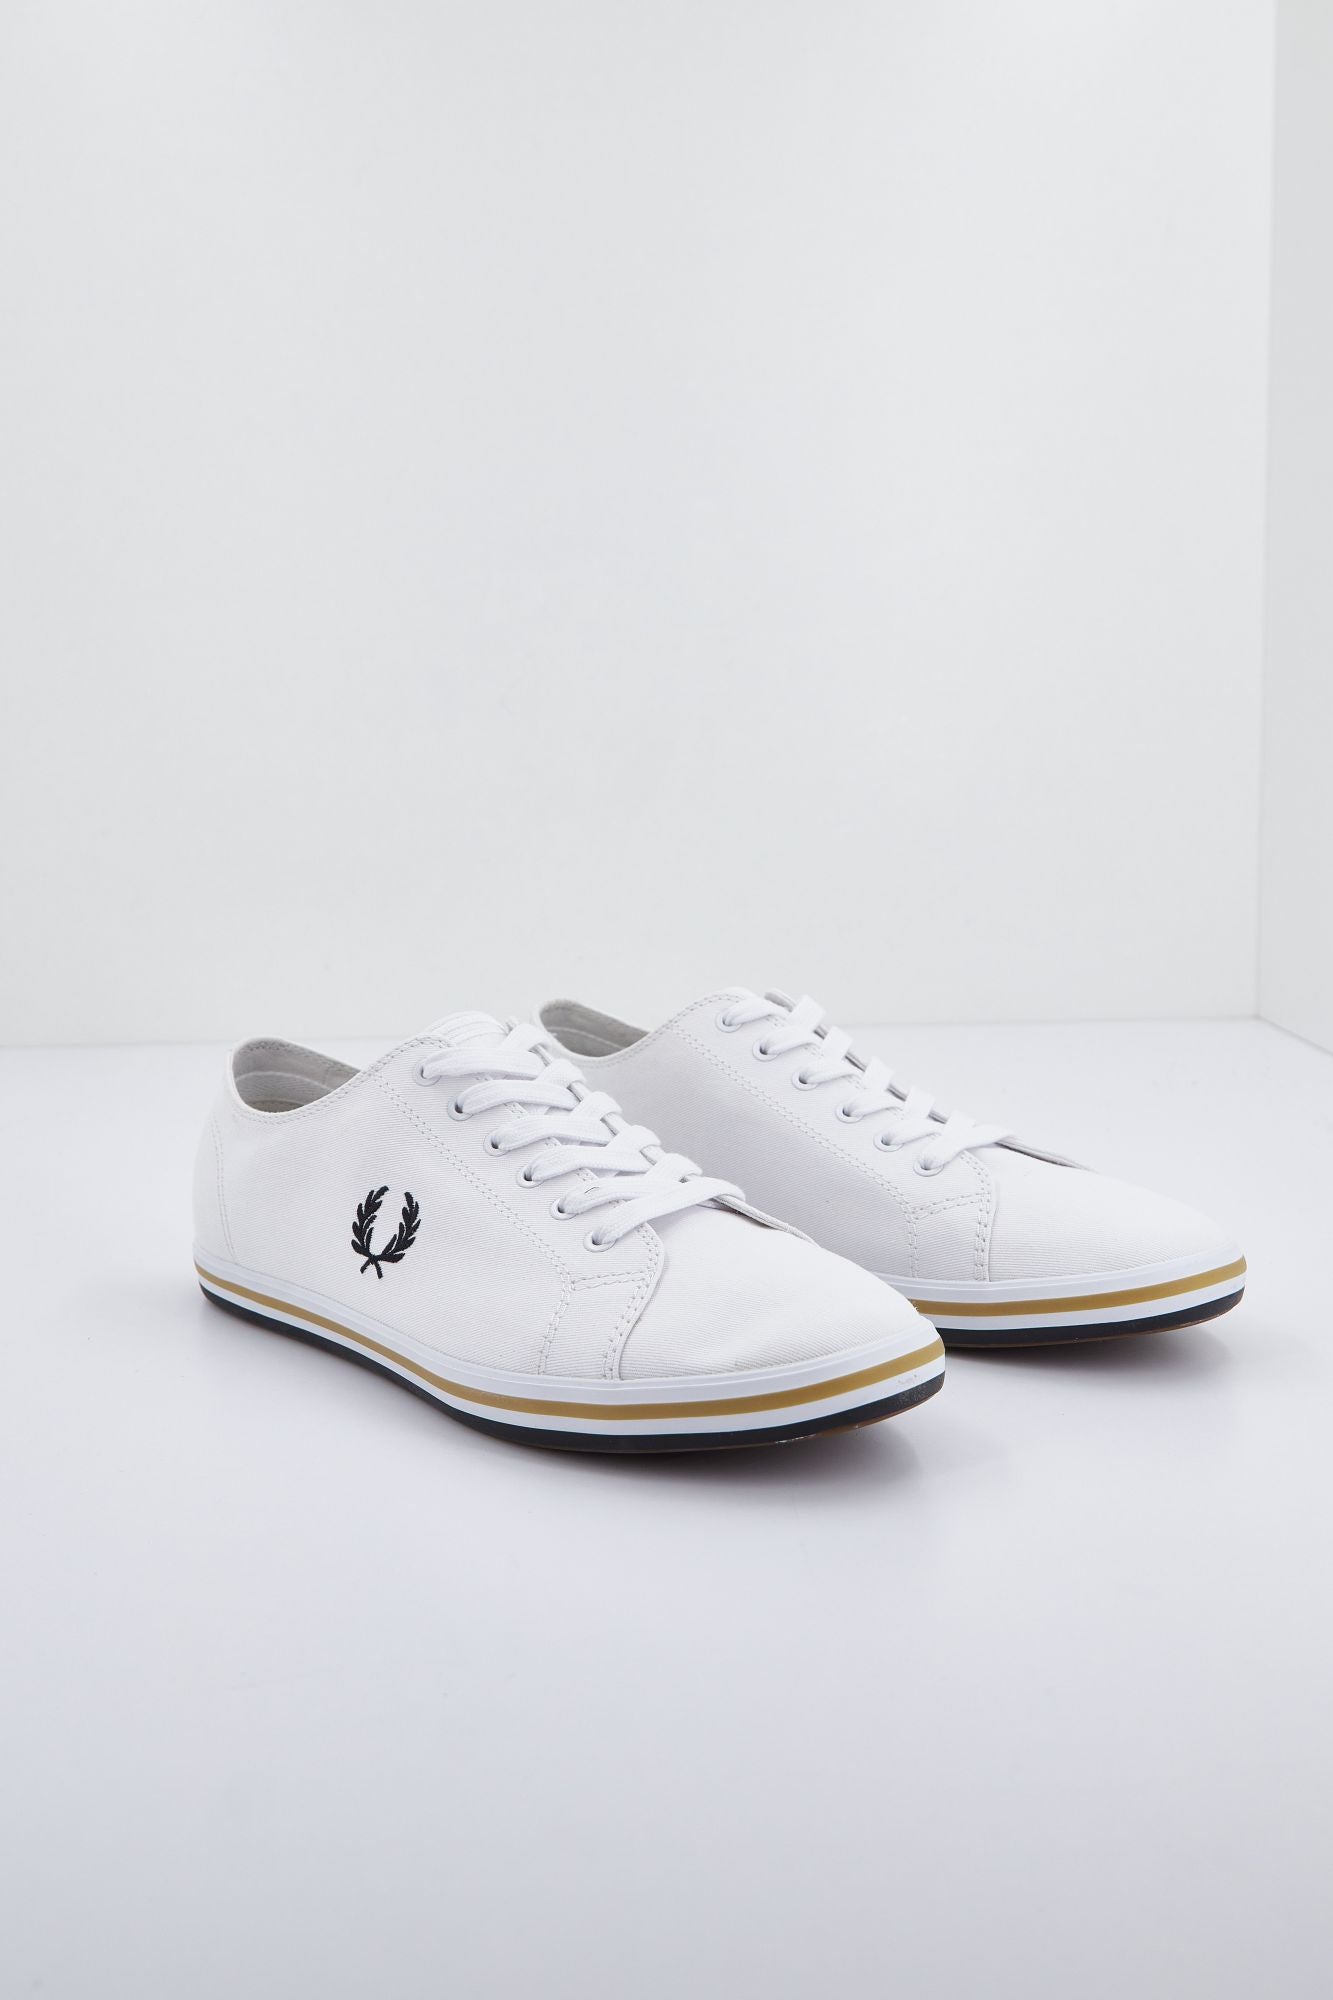 FRED PERRY KINGSTON TWILL en color BLANCO (1)